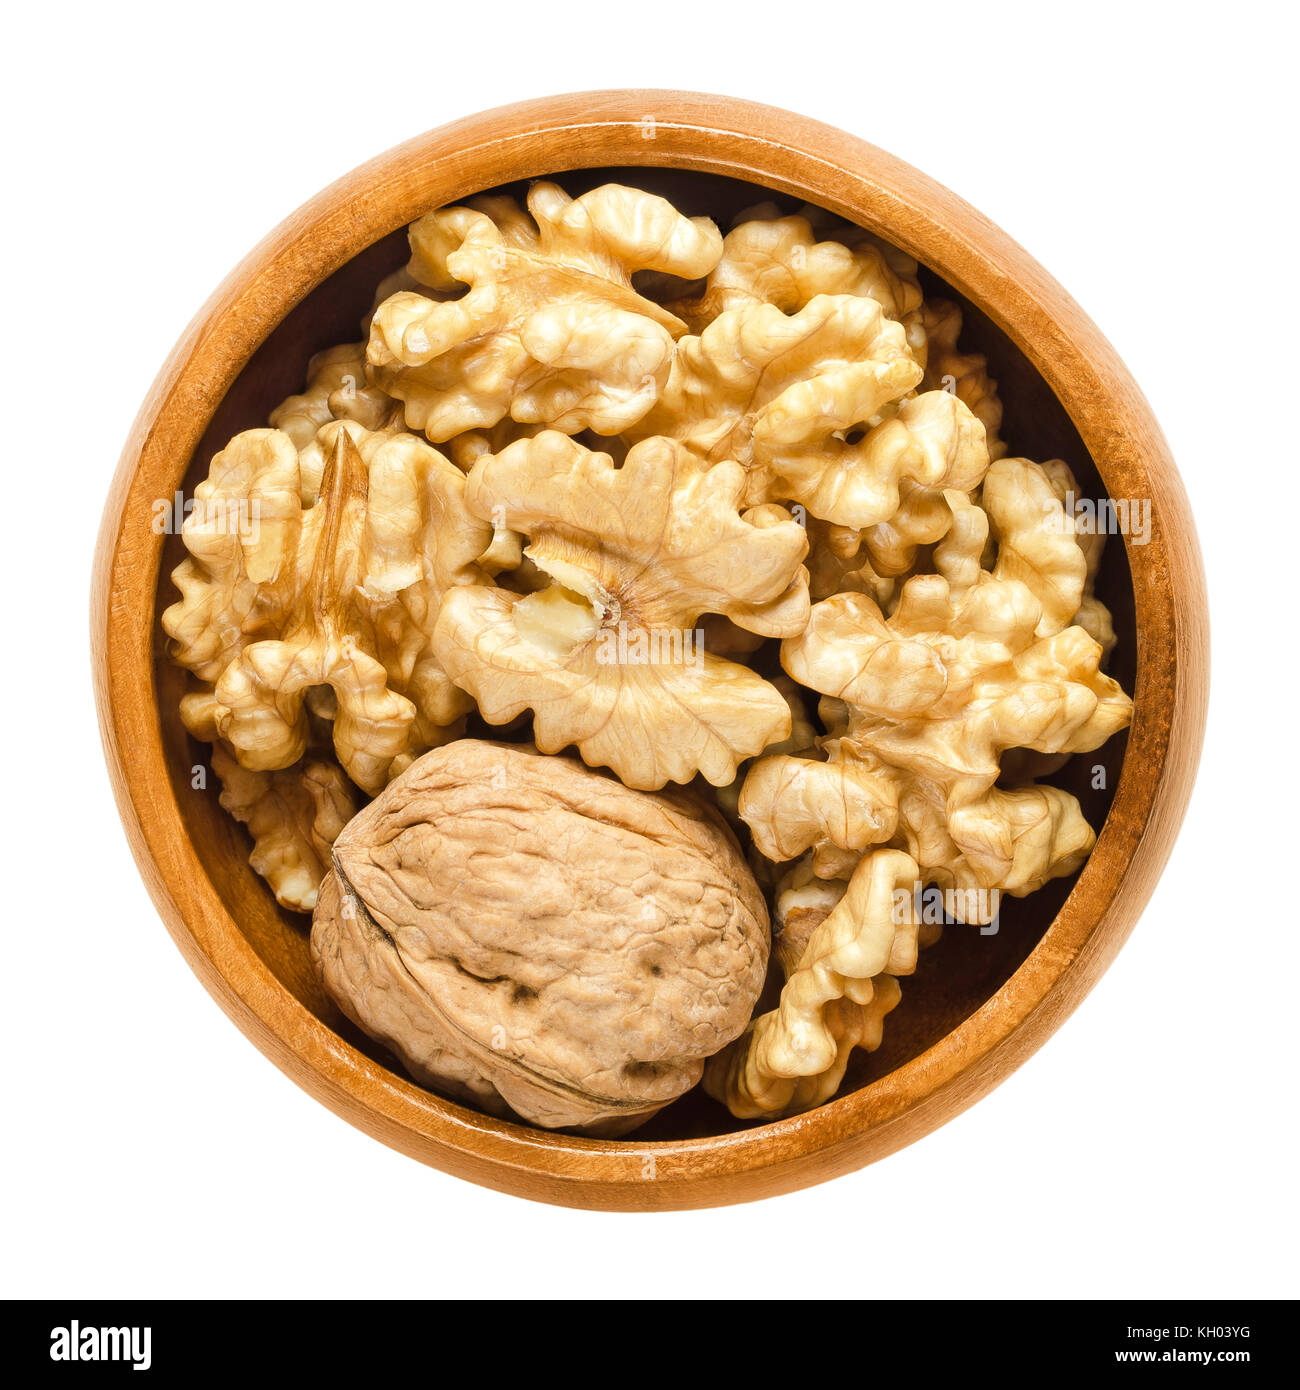 Whole walnut and shelled walnut kernel halves in wooden bowl. Seeds of the common walnut tree Juglans regia. Snack or used in bakery. Stock Photo